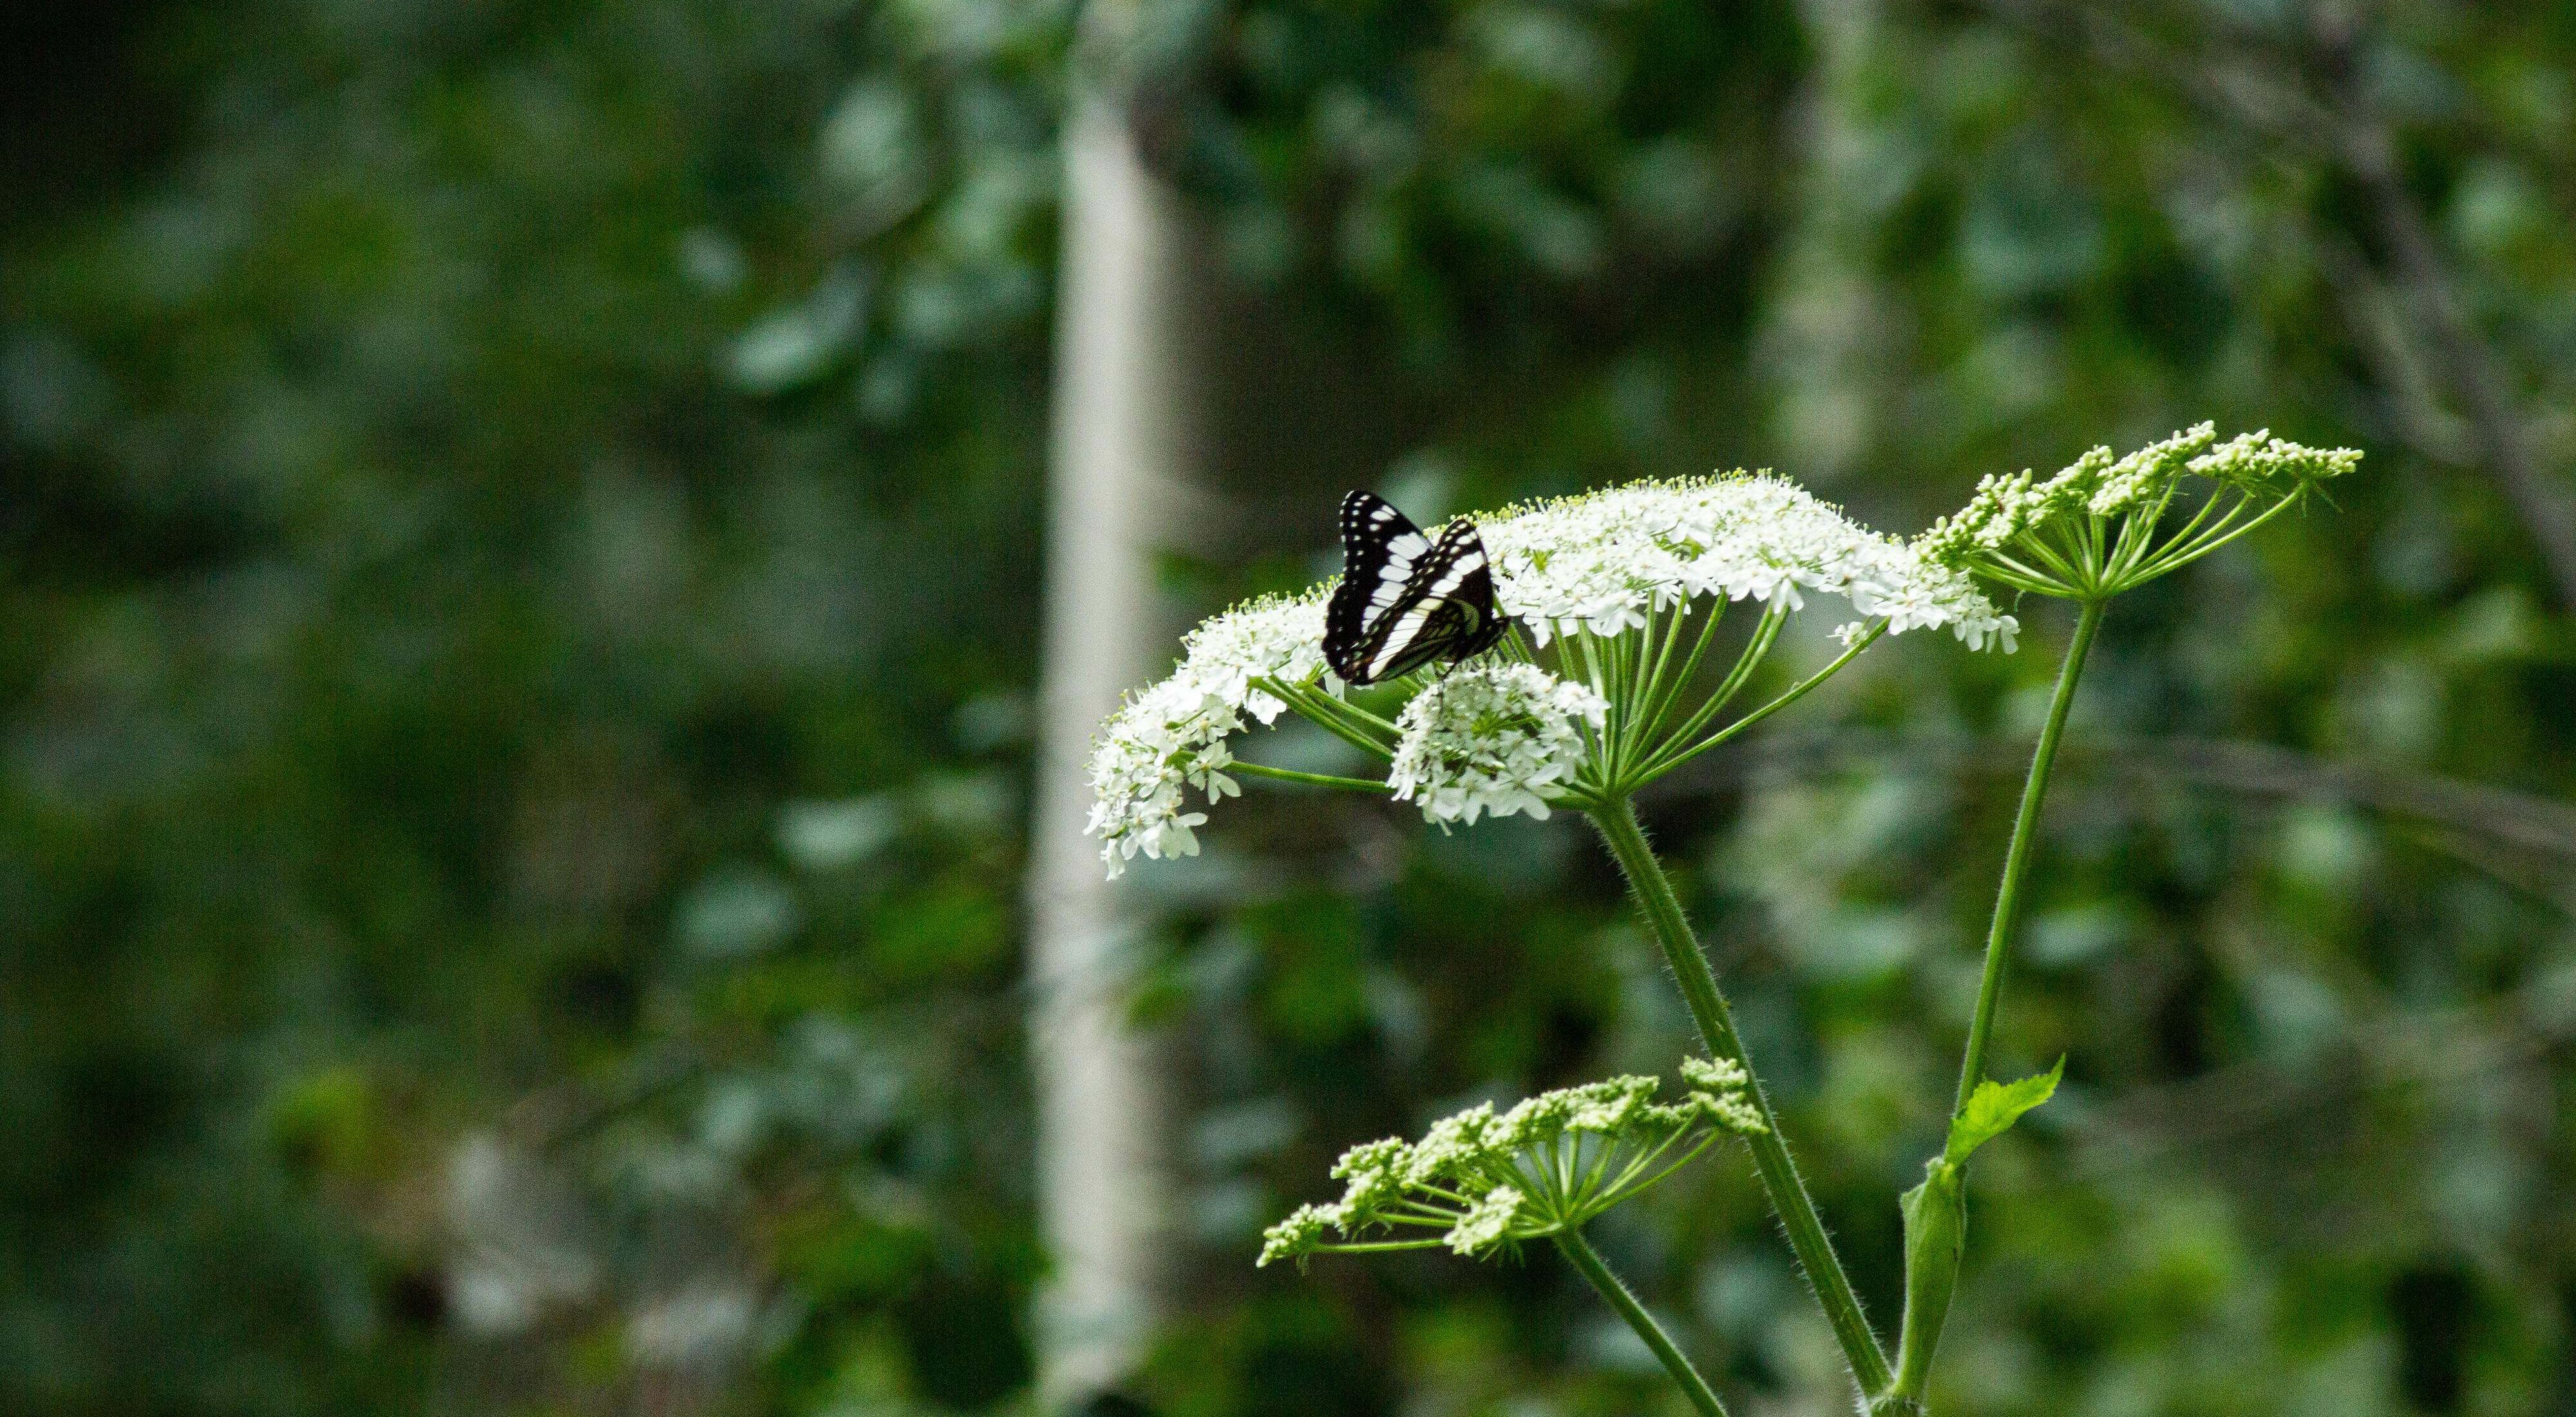 A black and white butterfly sitting on a white flower.